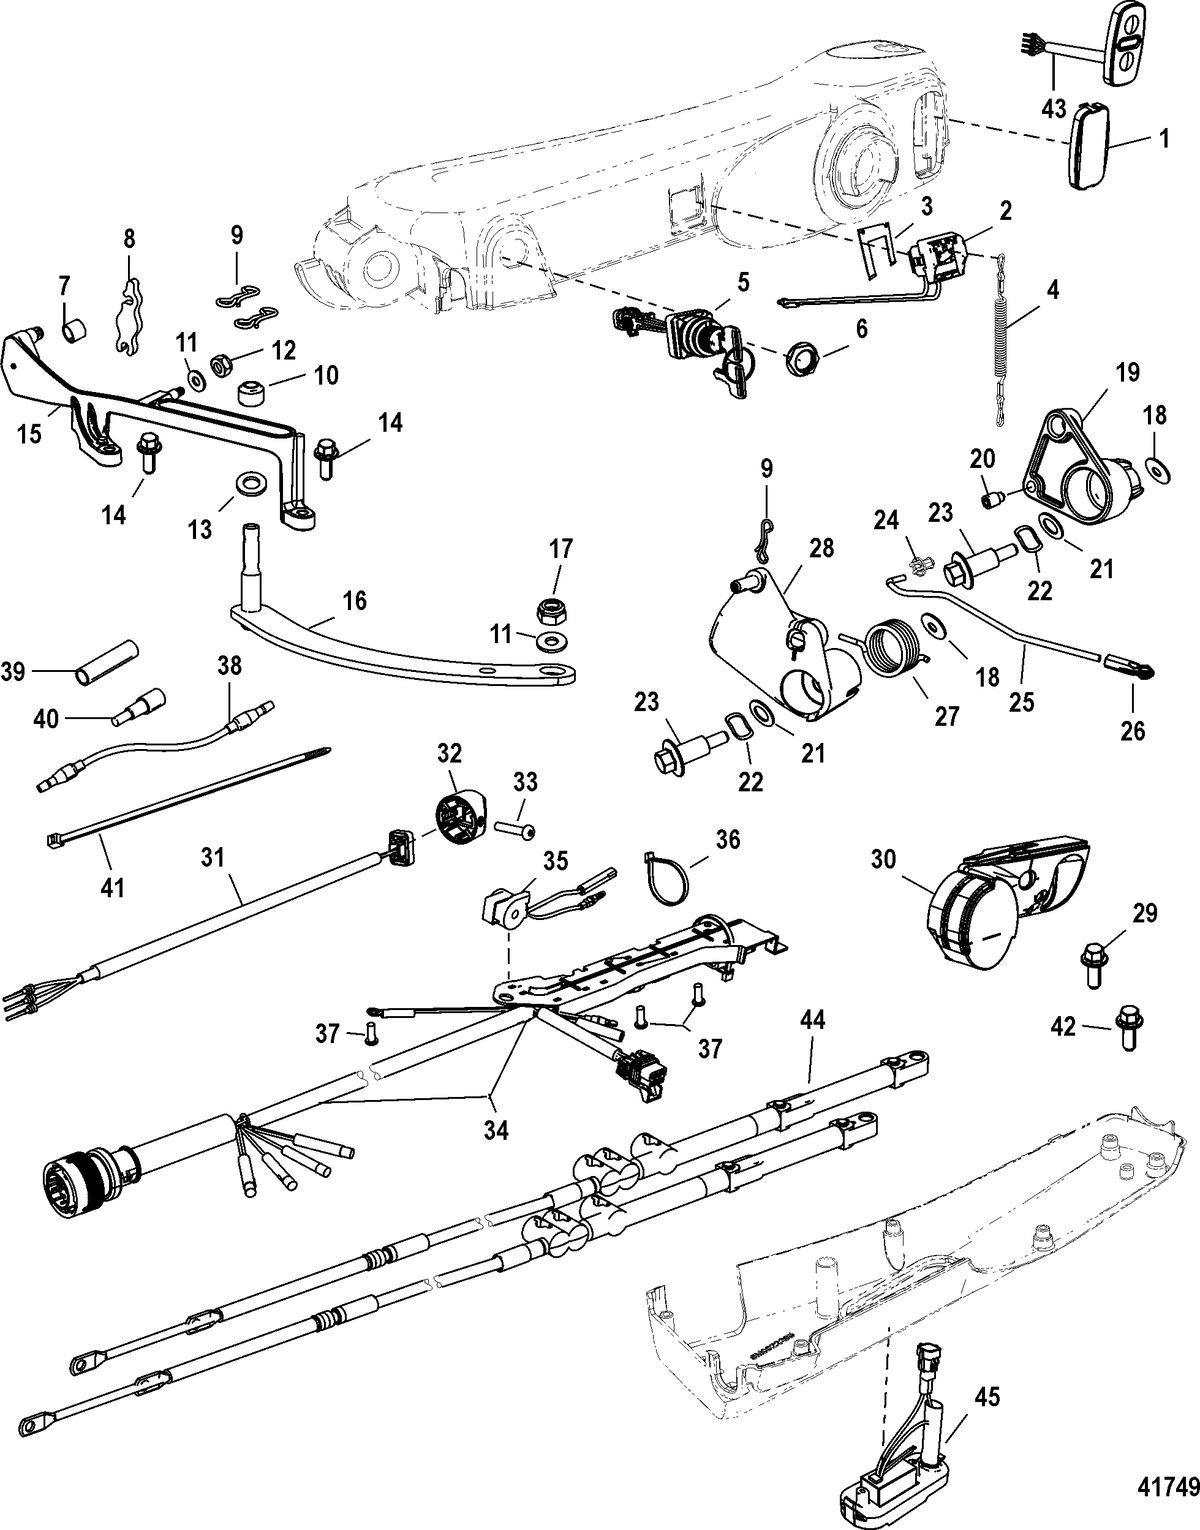 ACCESSORIES STEERING SYSTEMS AND COMPONENTS Big Tiller Handle Kit Components(Manual 40-60 ELHPT)